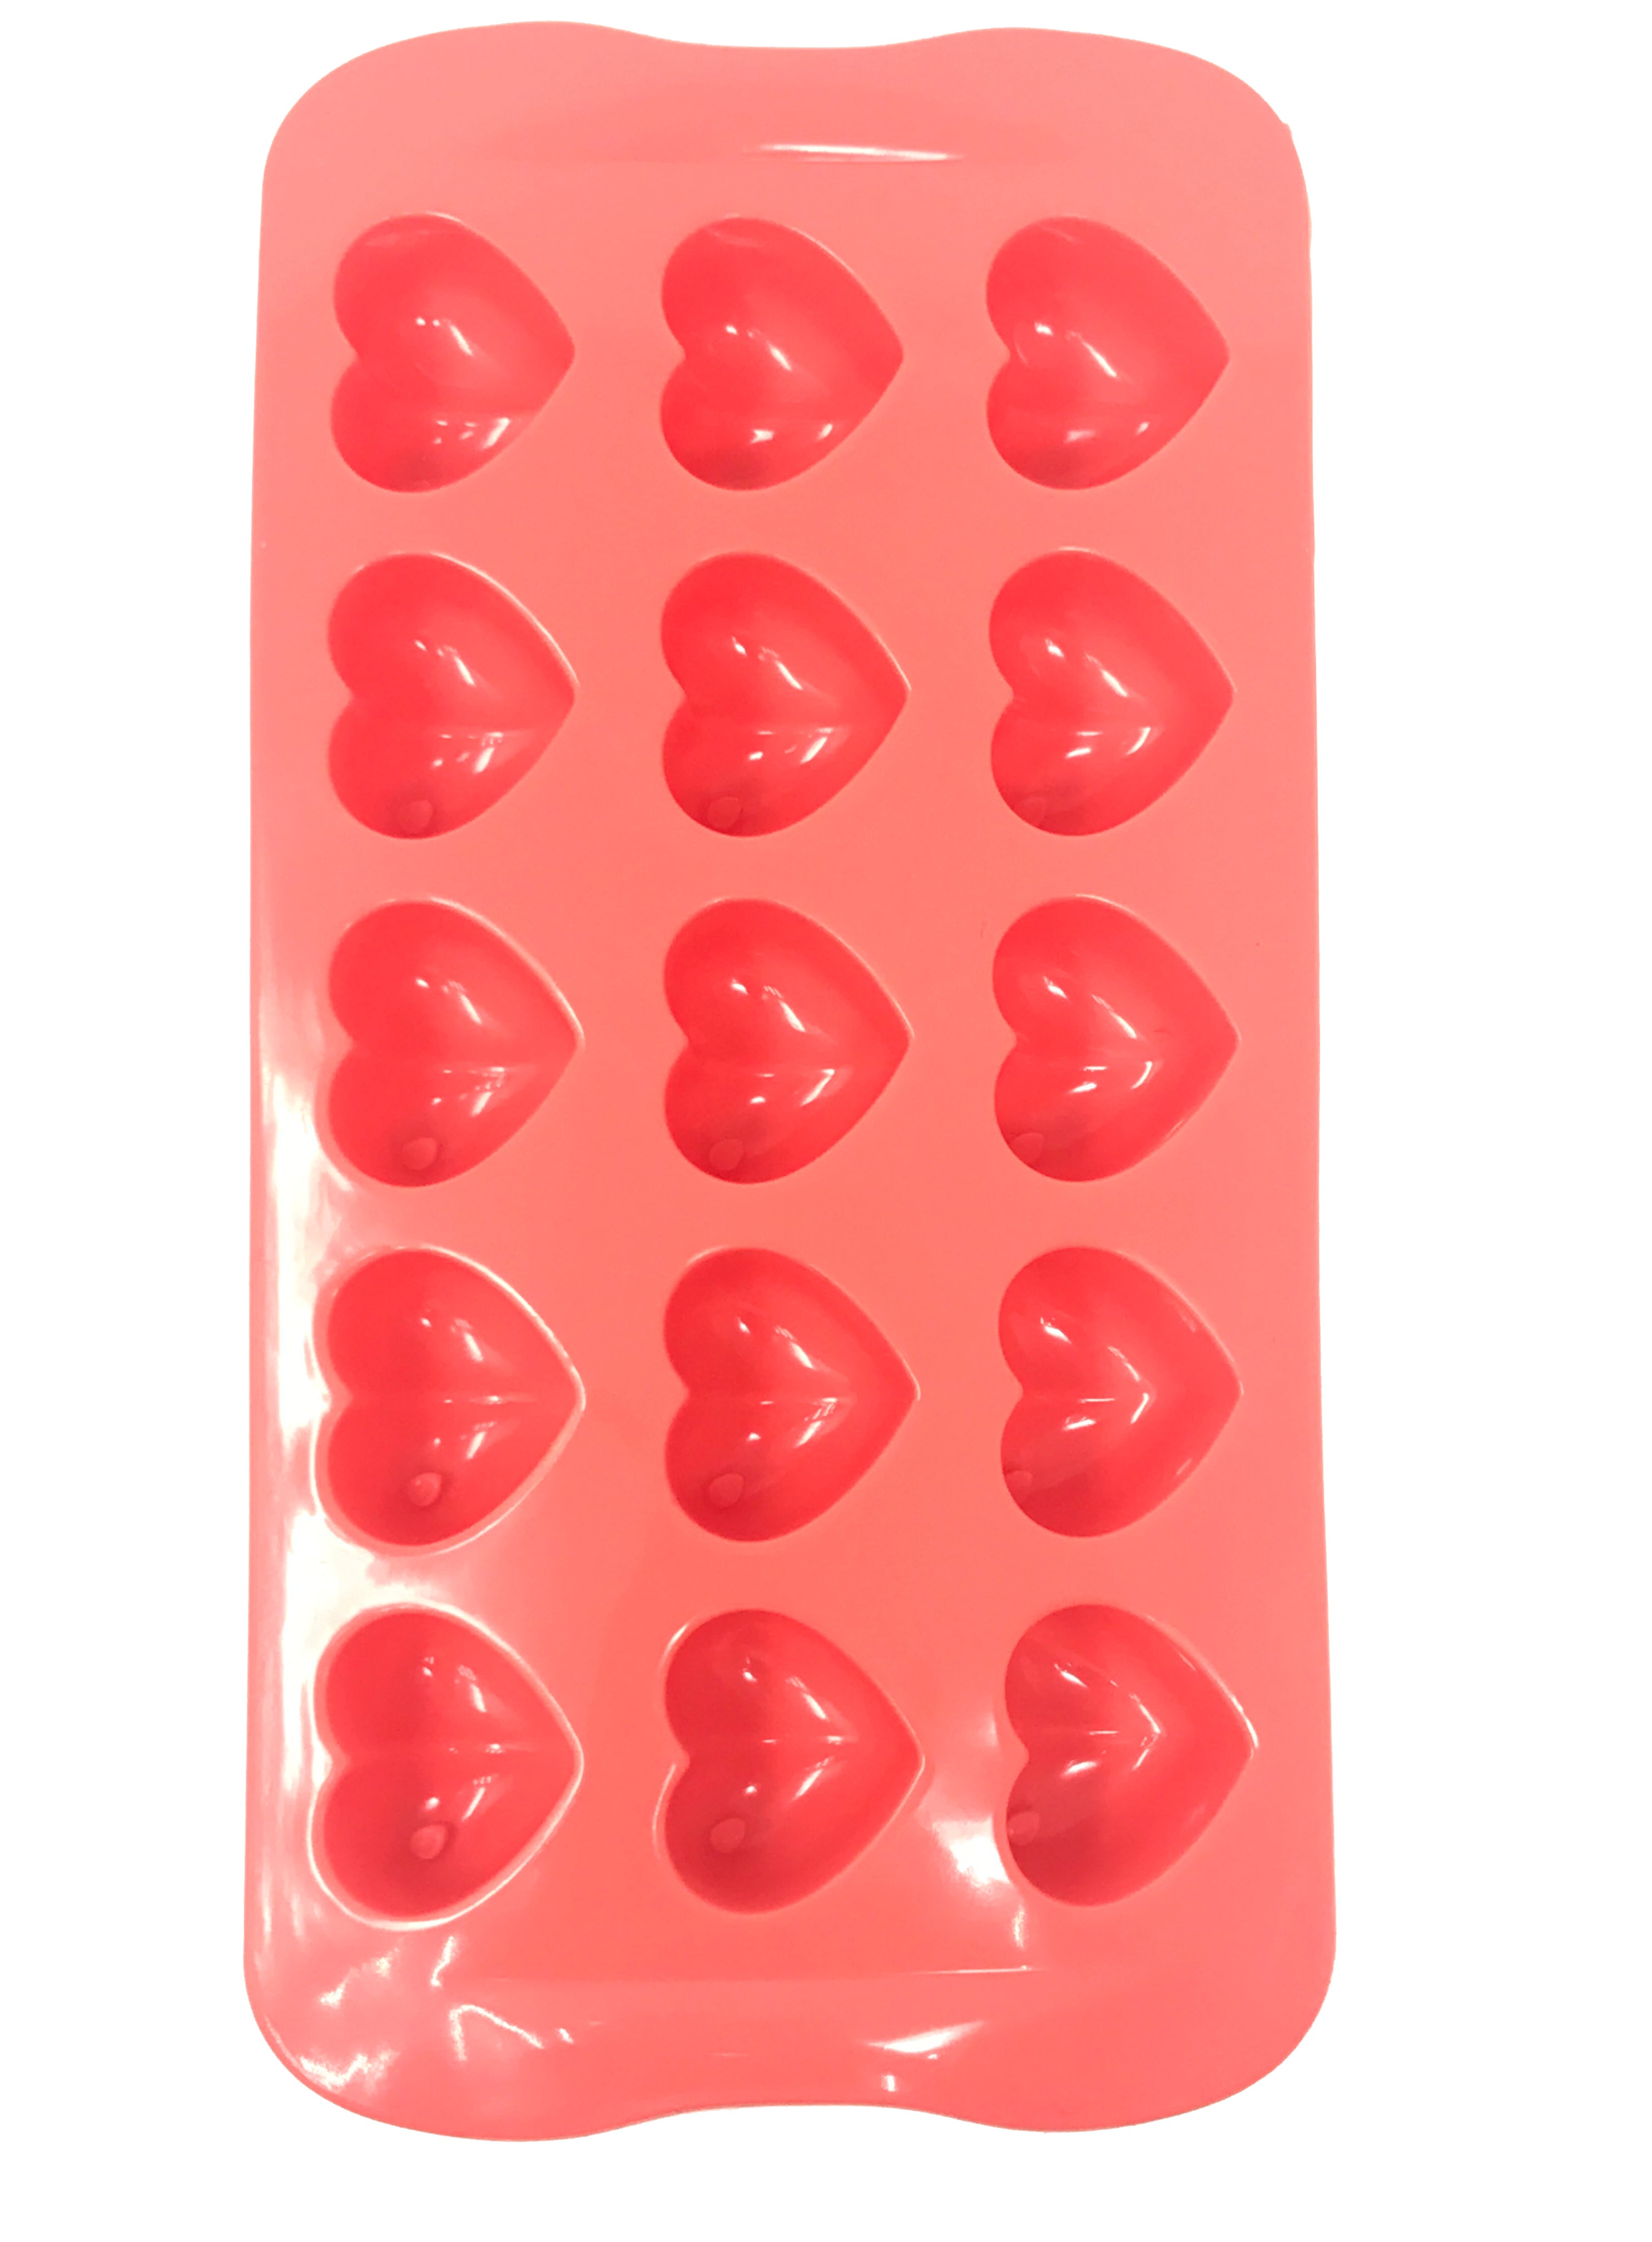 Silicone Heart Shape Chocolate , Candy Mold -25 Pcs | Accurate Rubber ...